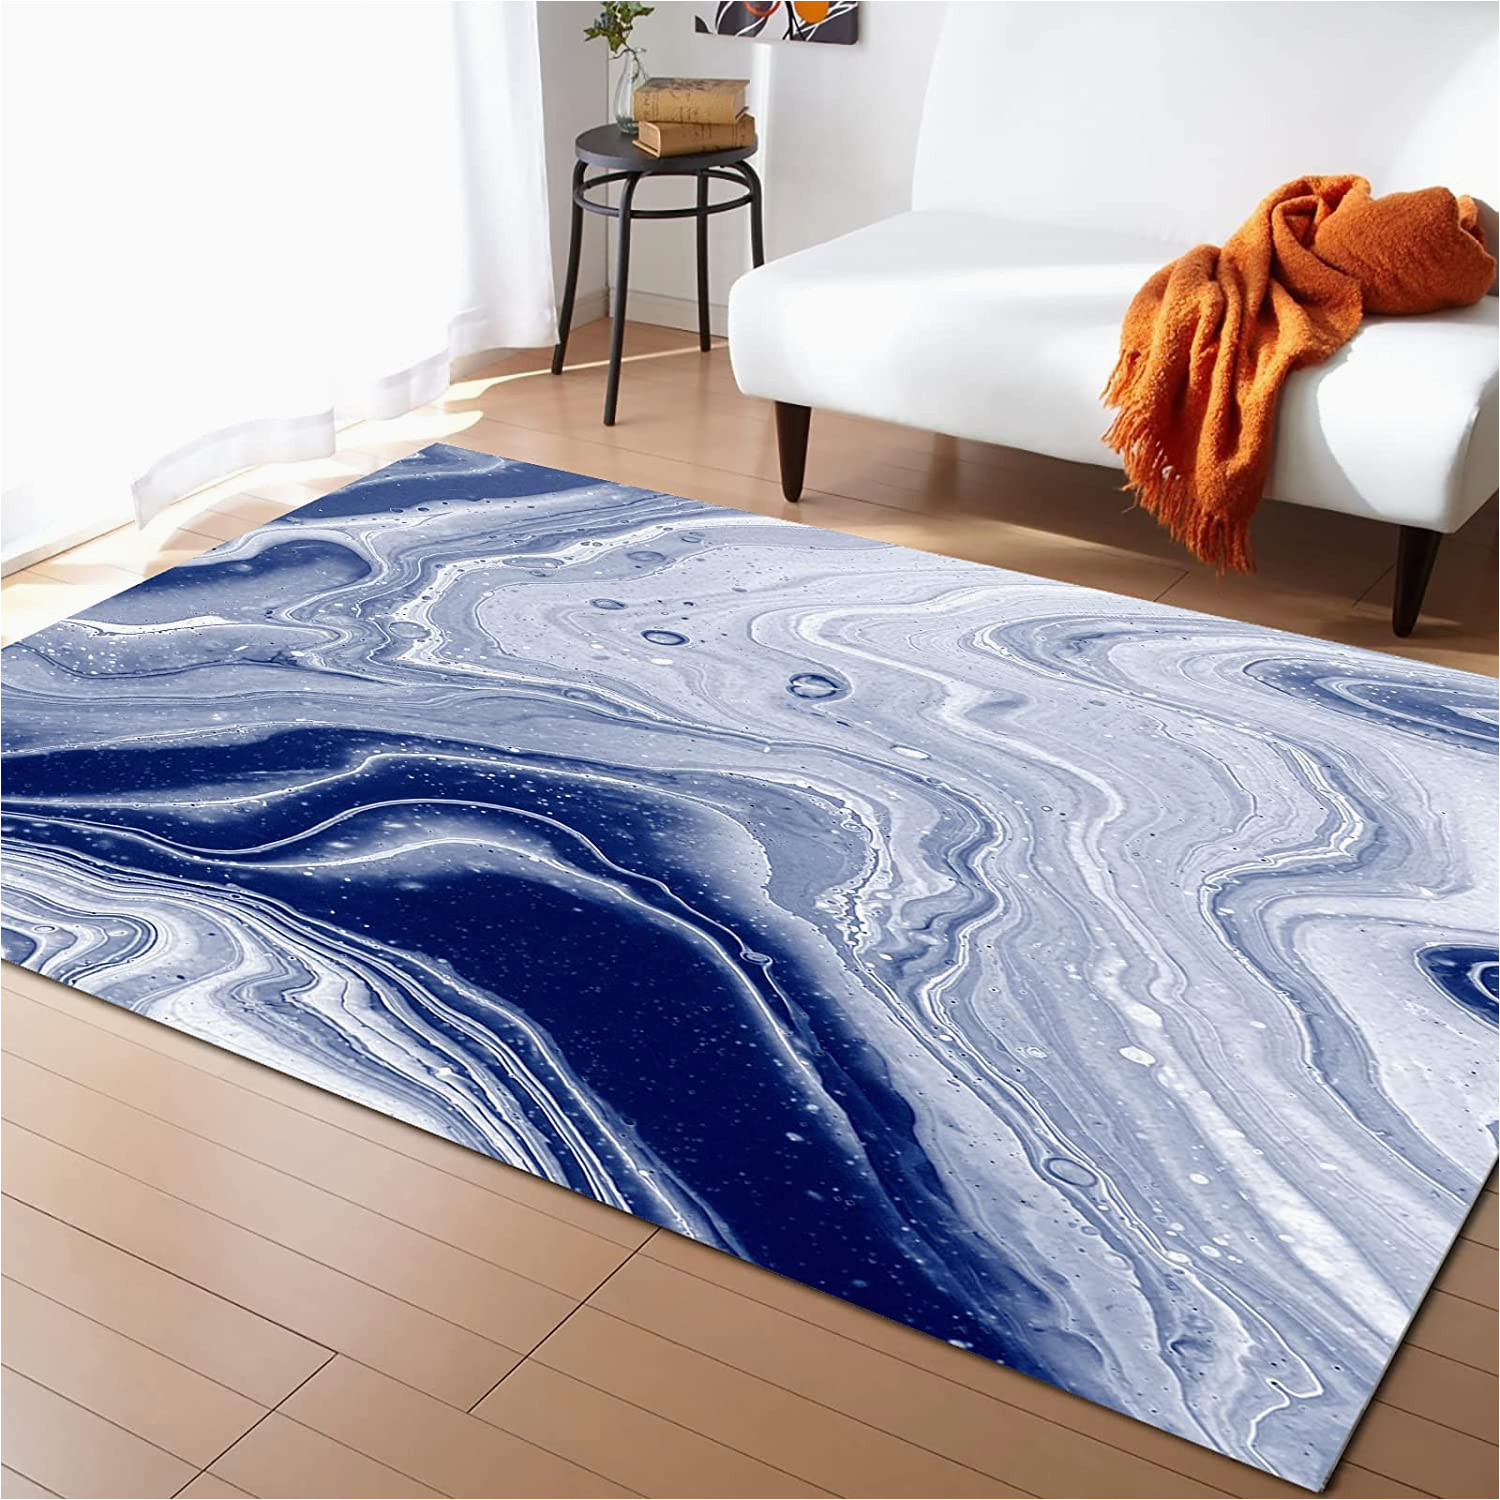 Blue Marble area Rug Navy Blue Marble Texture area Rug for Bedroom Living Room- Abstract Marble Ink Texture Contemporary Floor Carpet Comfy Runner Rug Nursery Playmats …